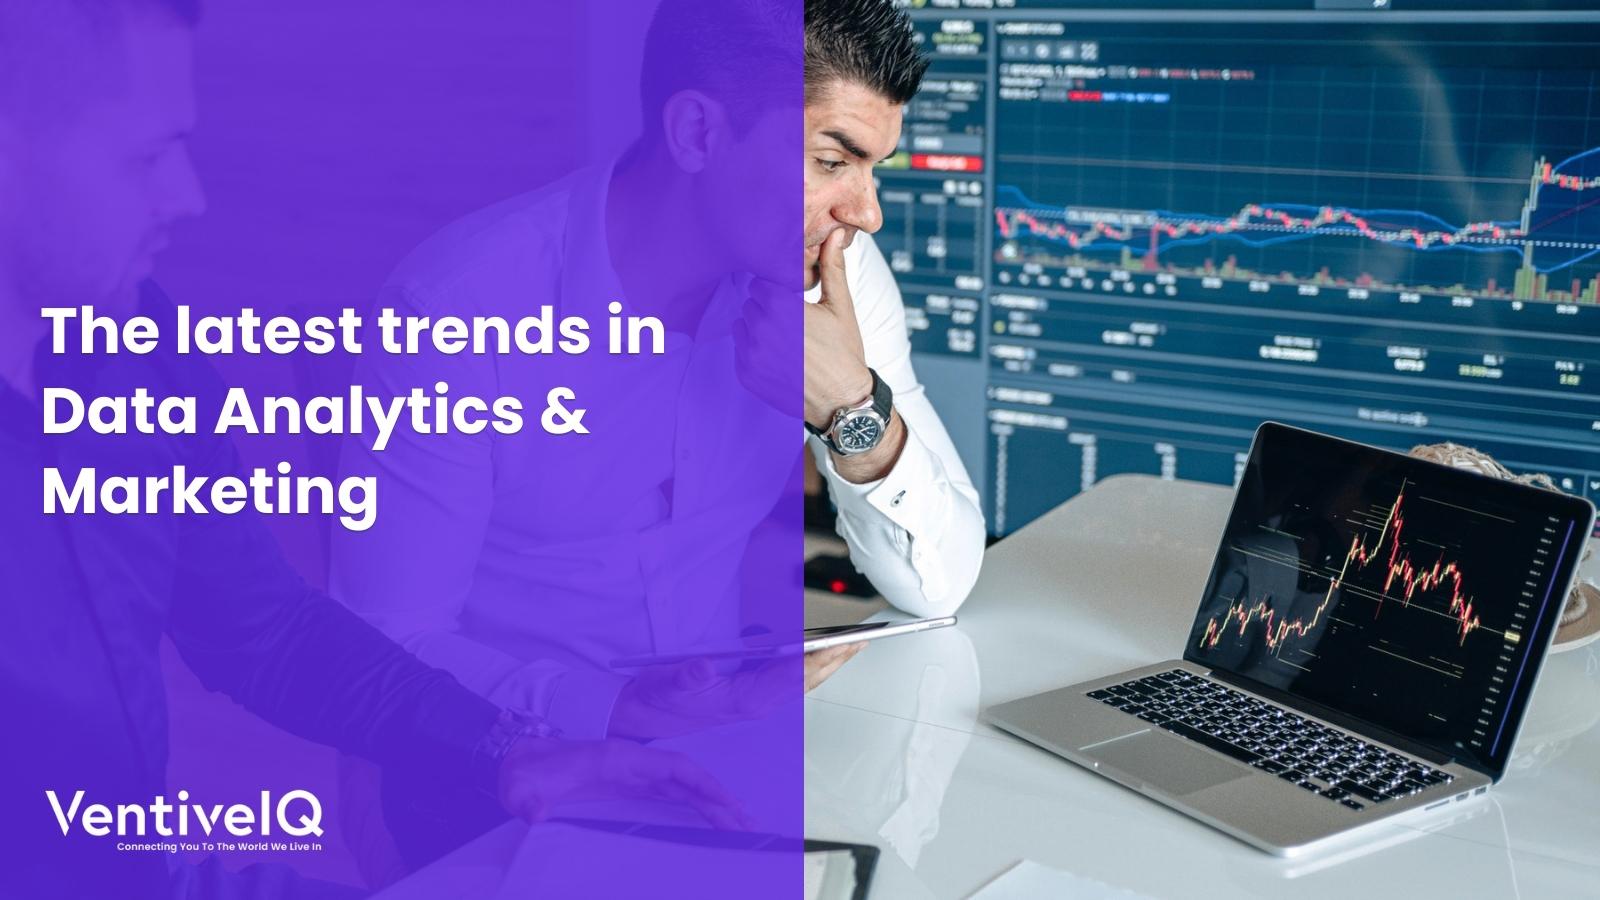 The latest trends in data analytics and marketing